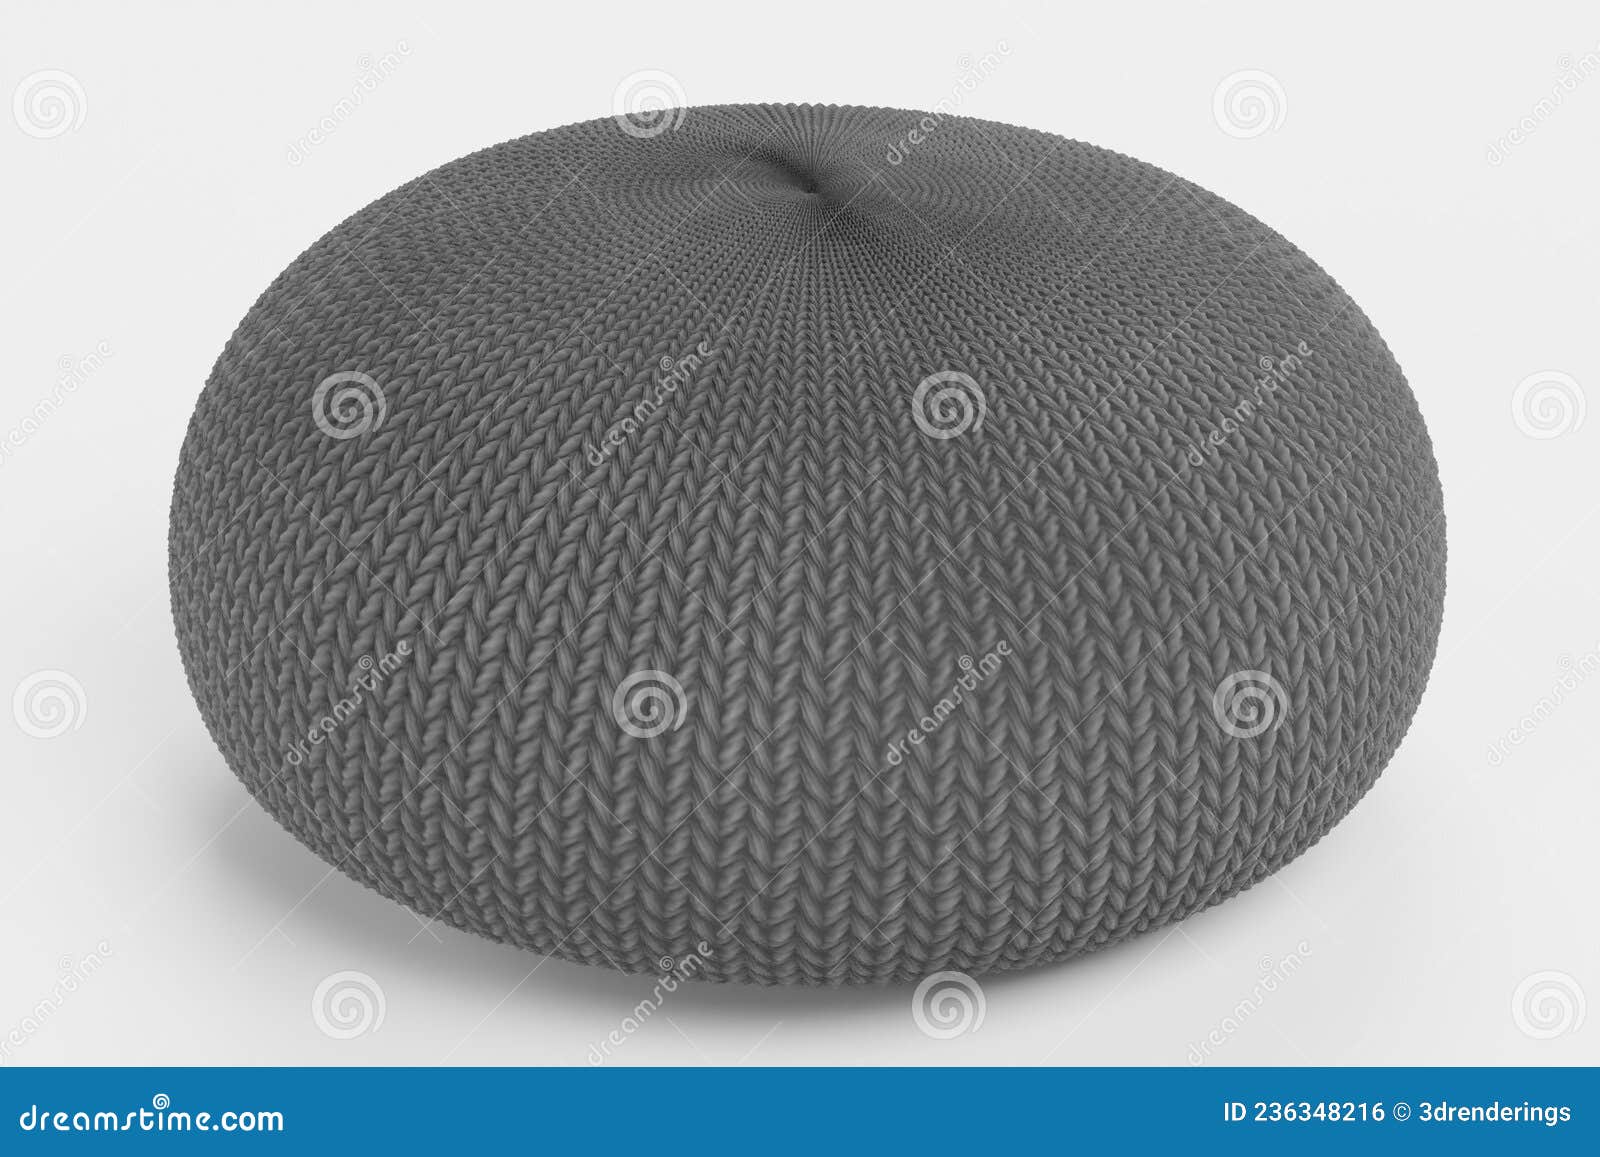 3d render of knitted seat